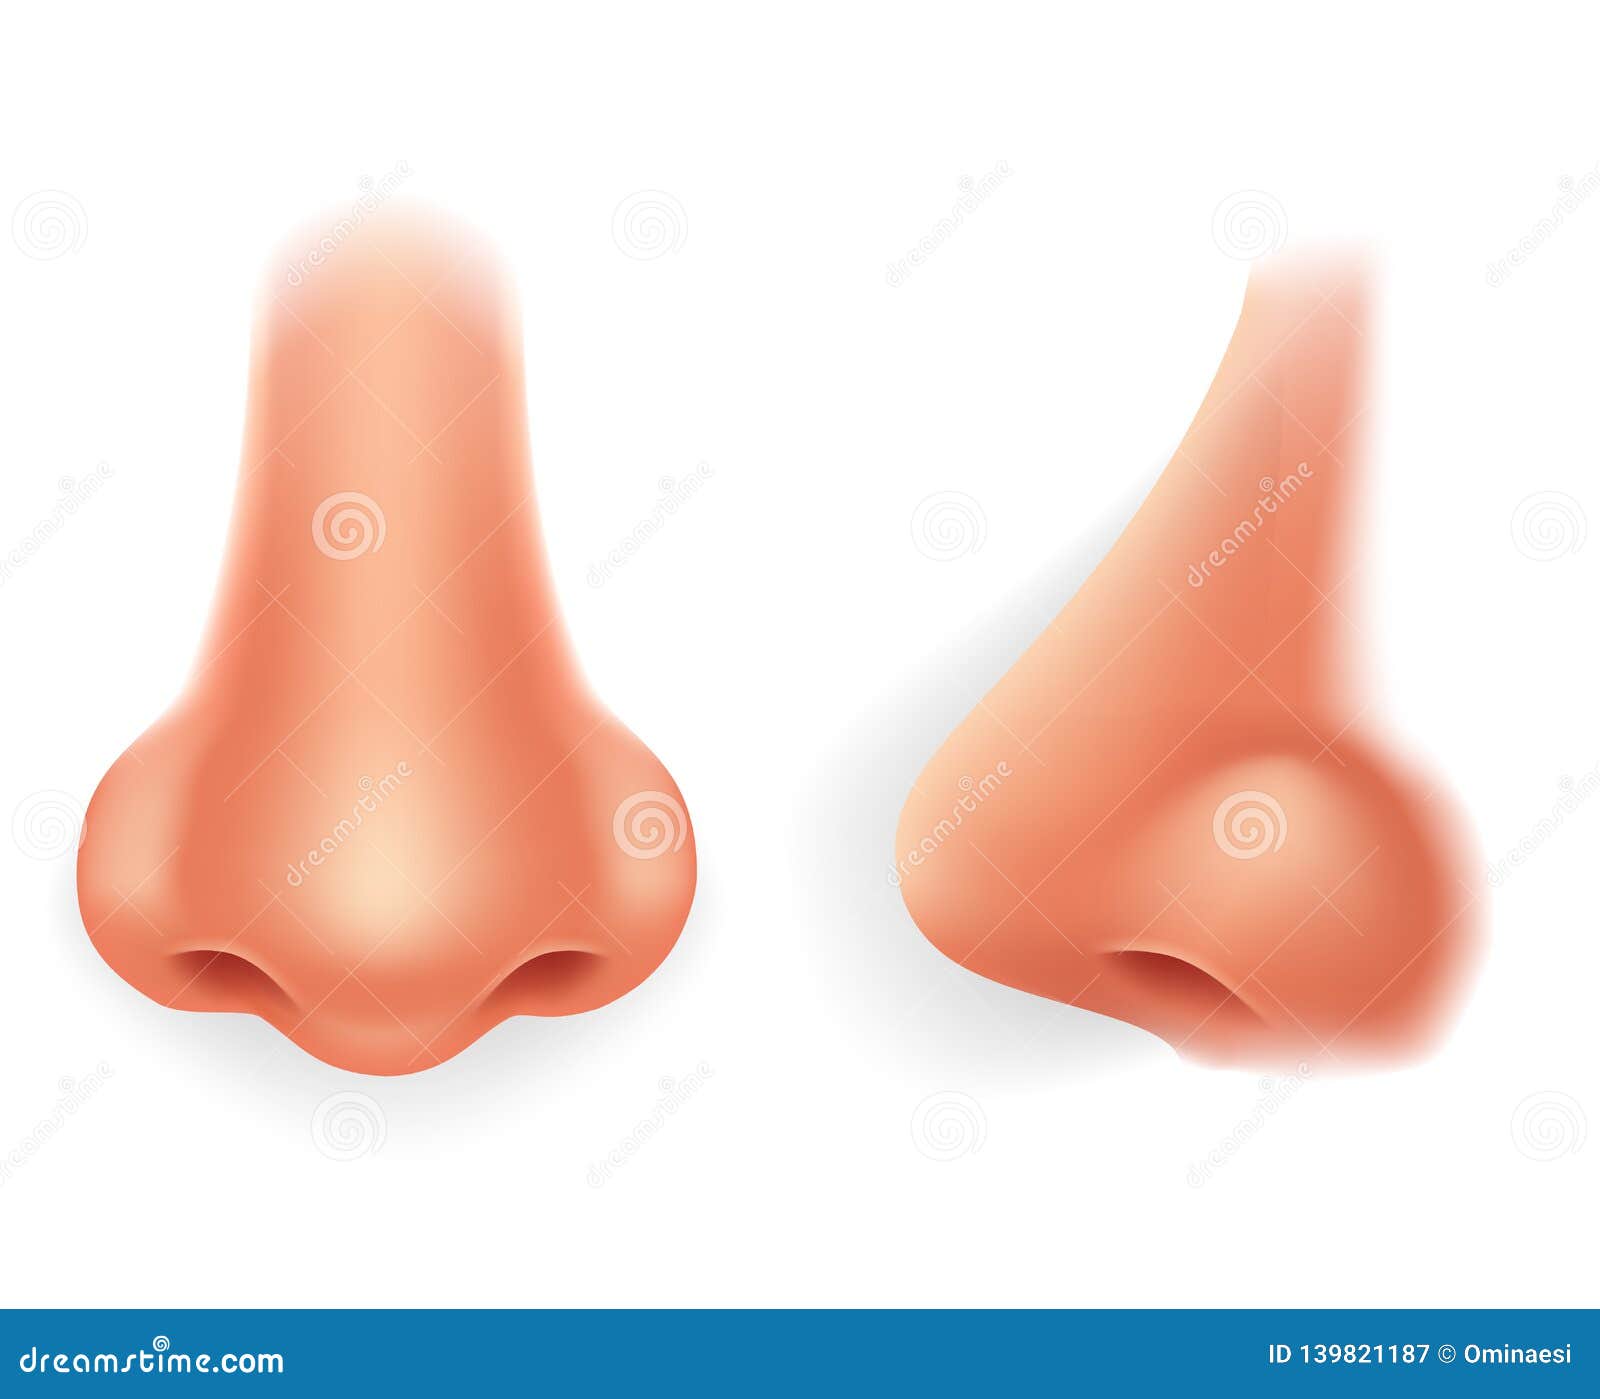 human noses profile